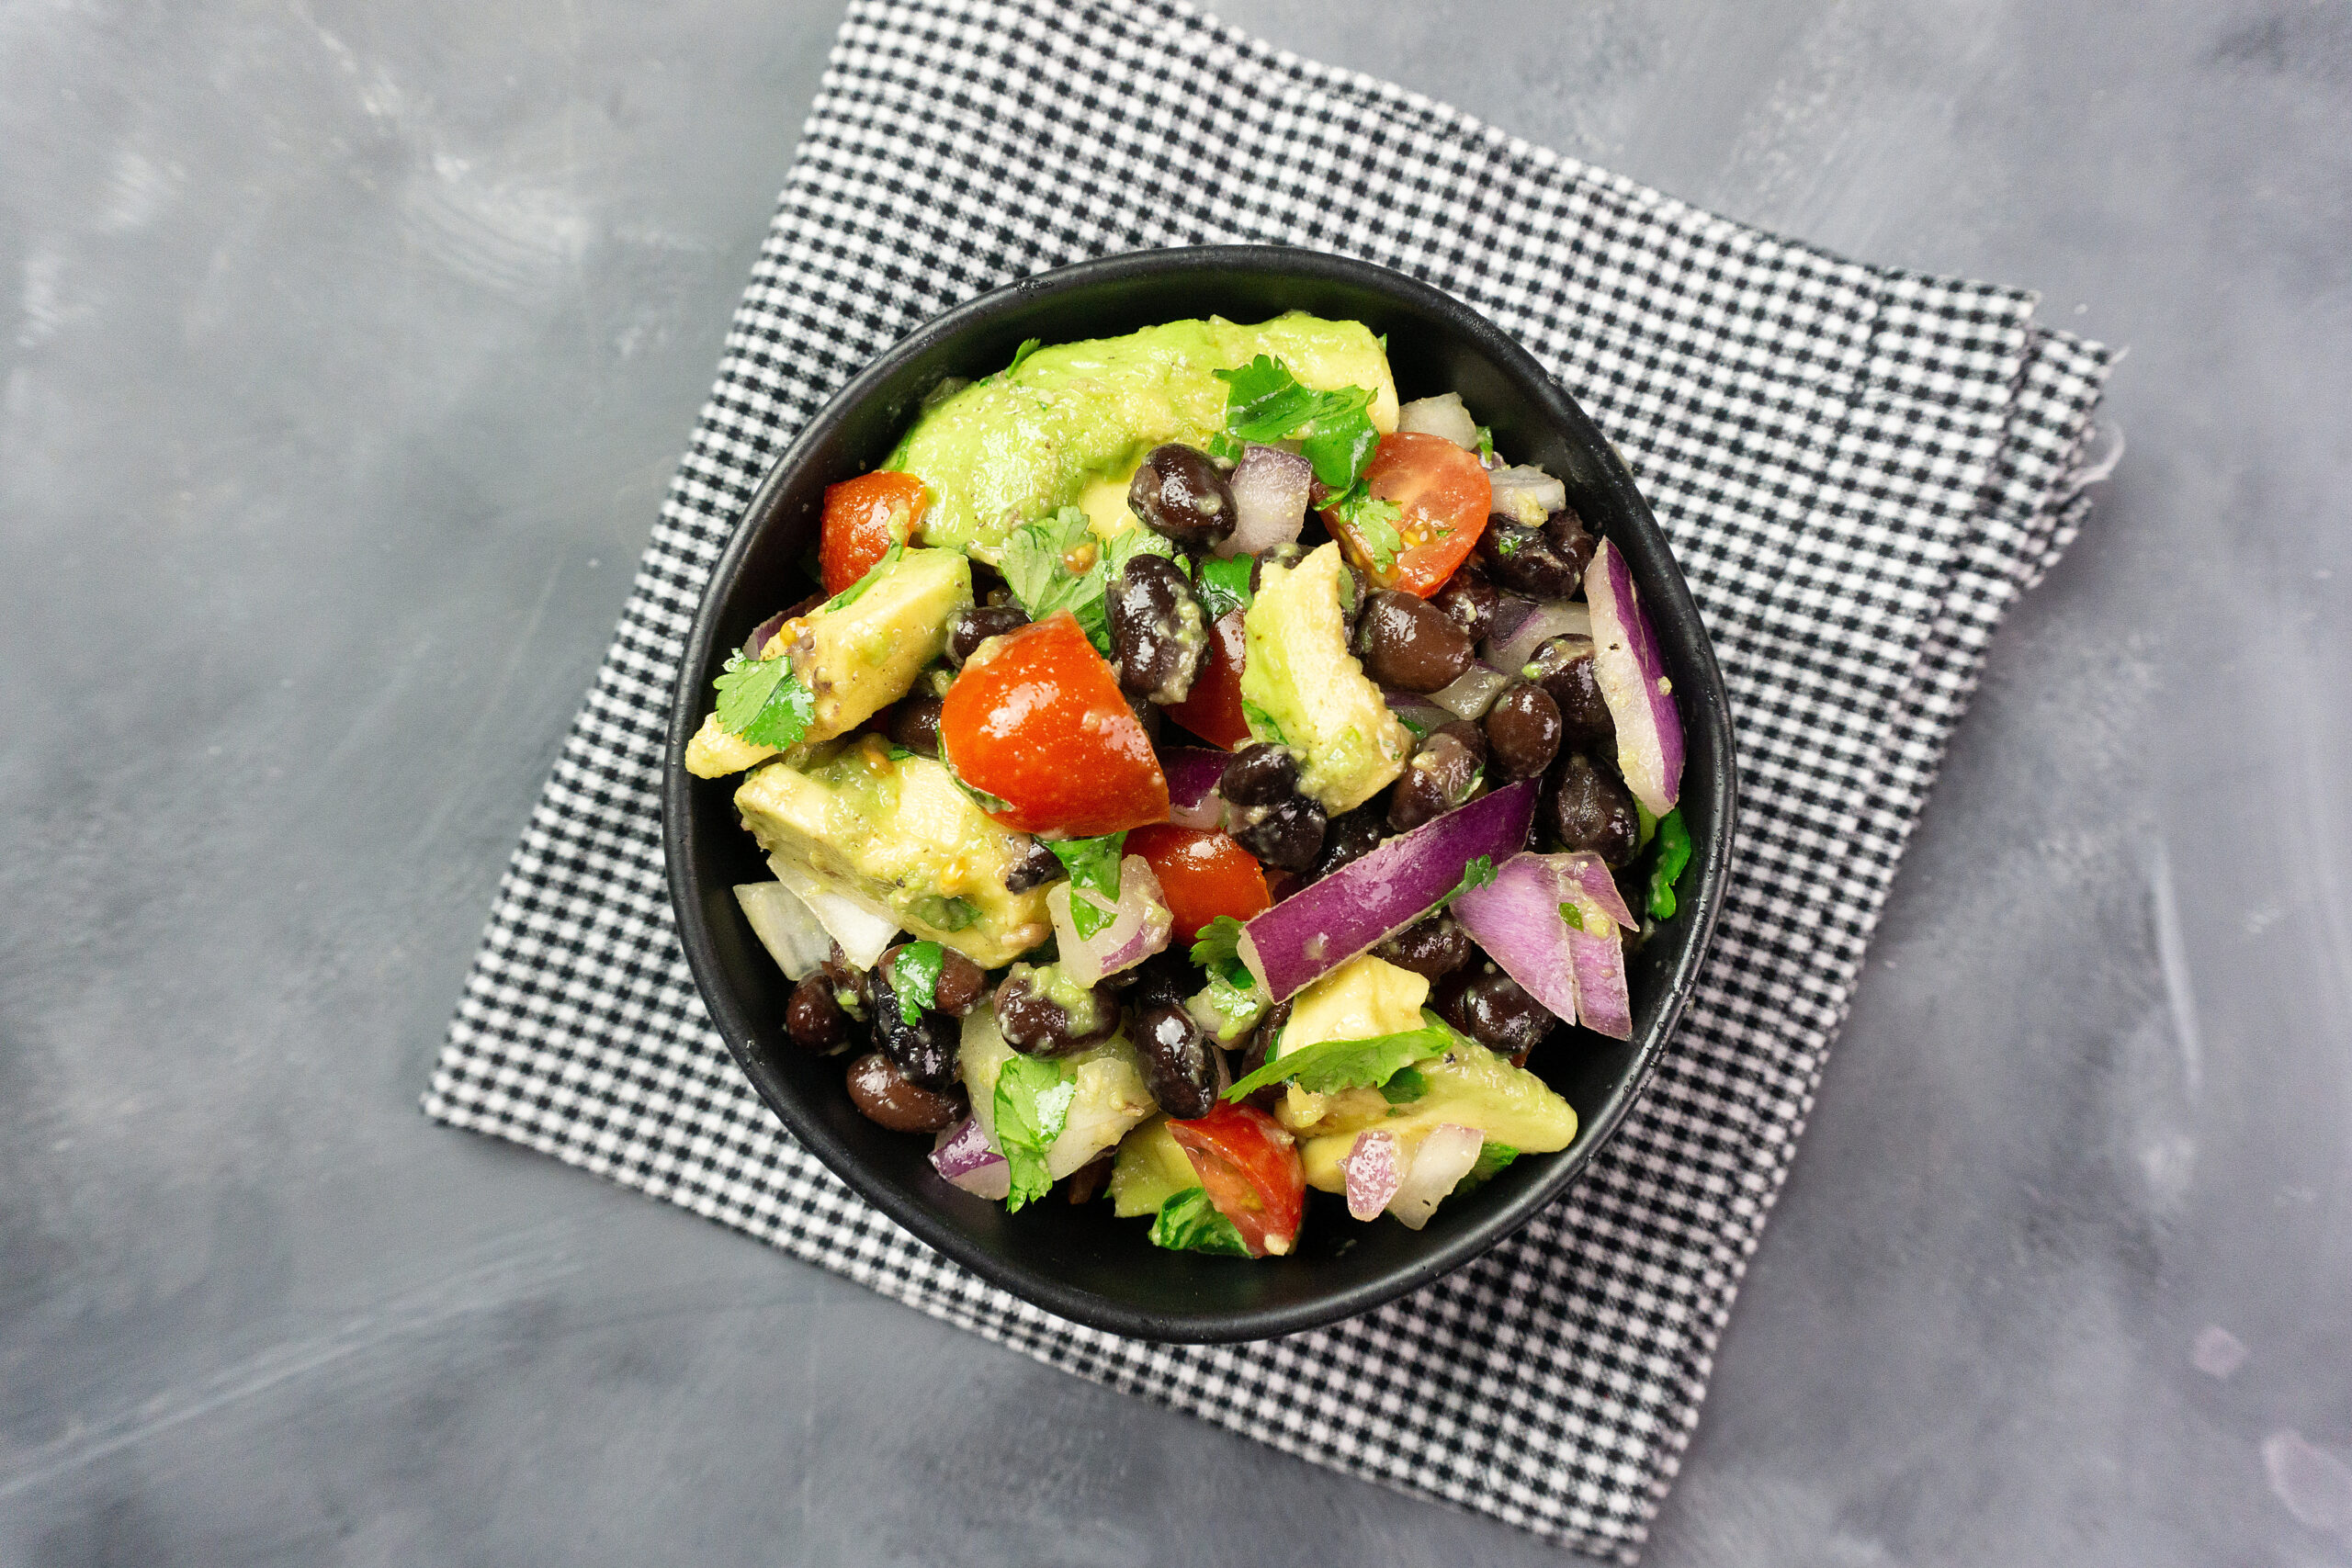 Featured image showing the finished weight watchers black bean salad ready to eat. 